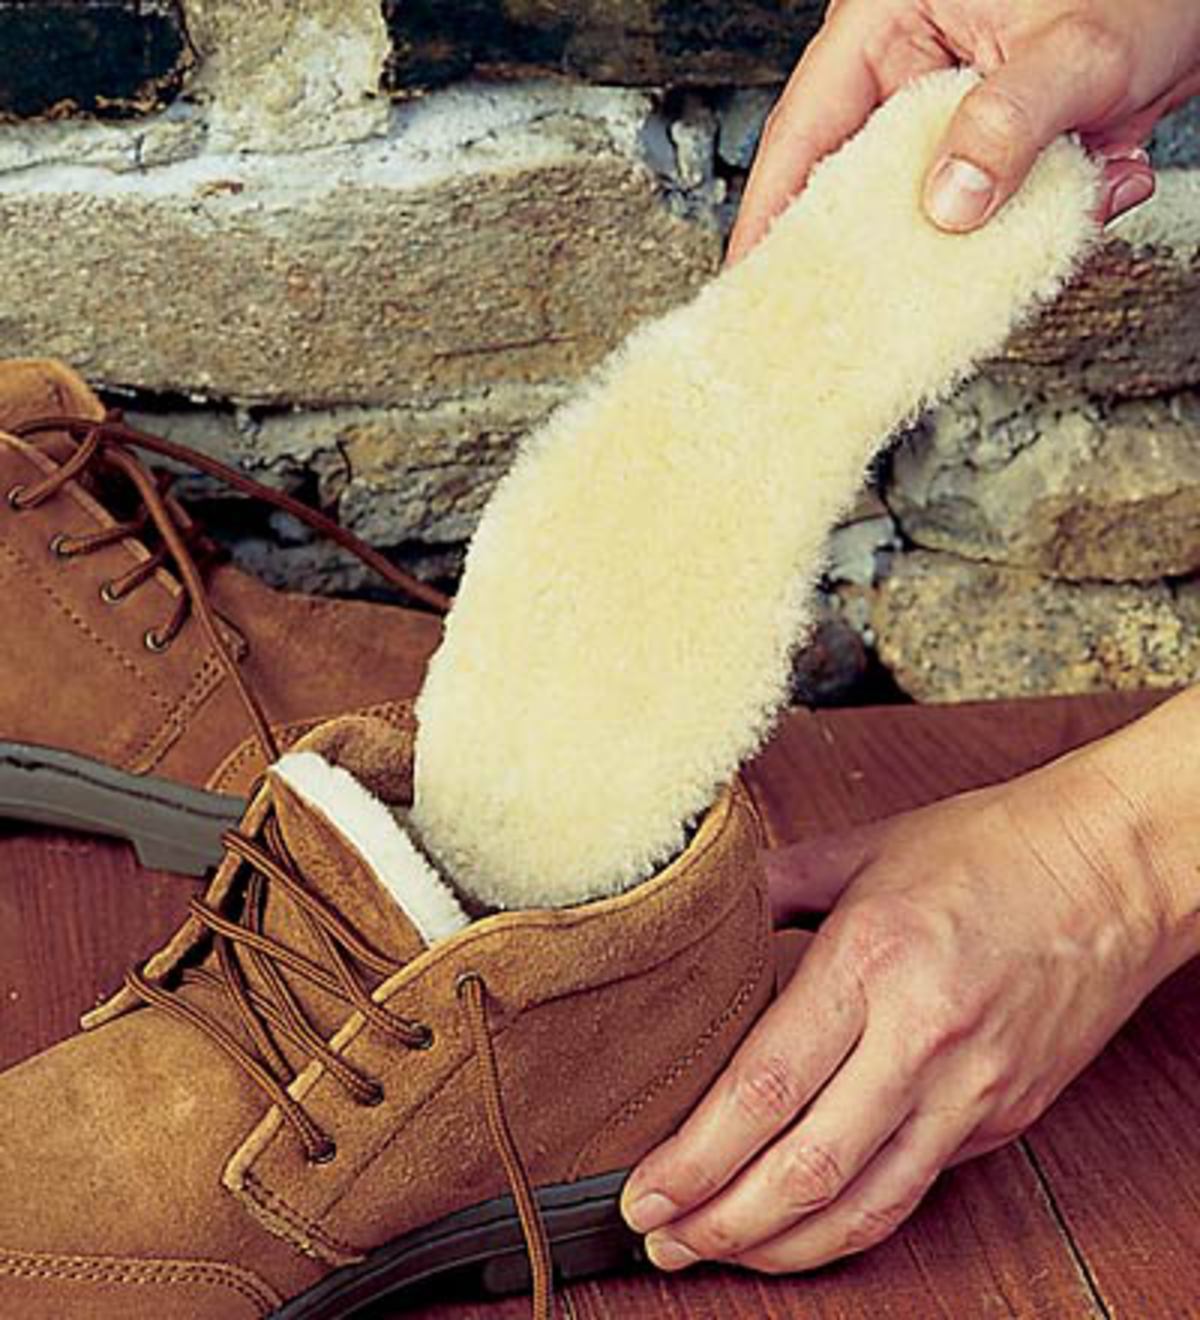 ugg replacement insoles